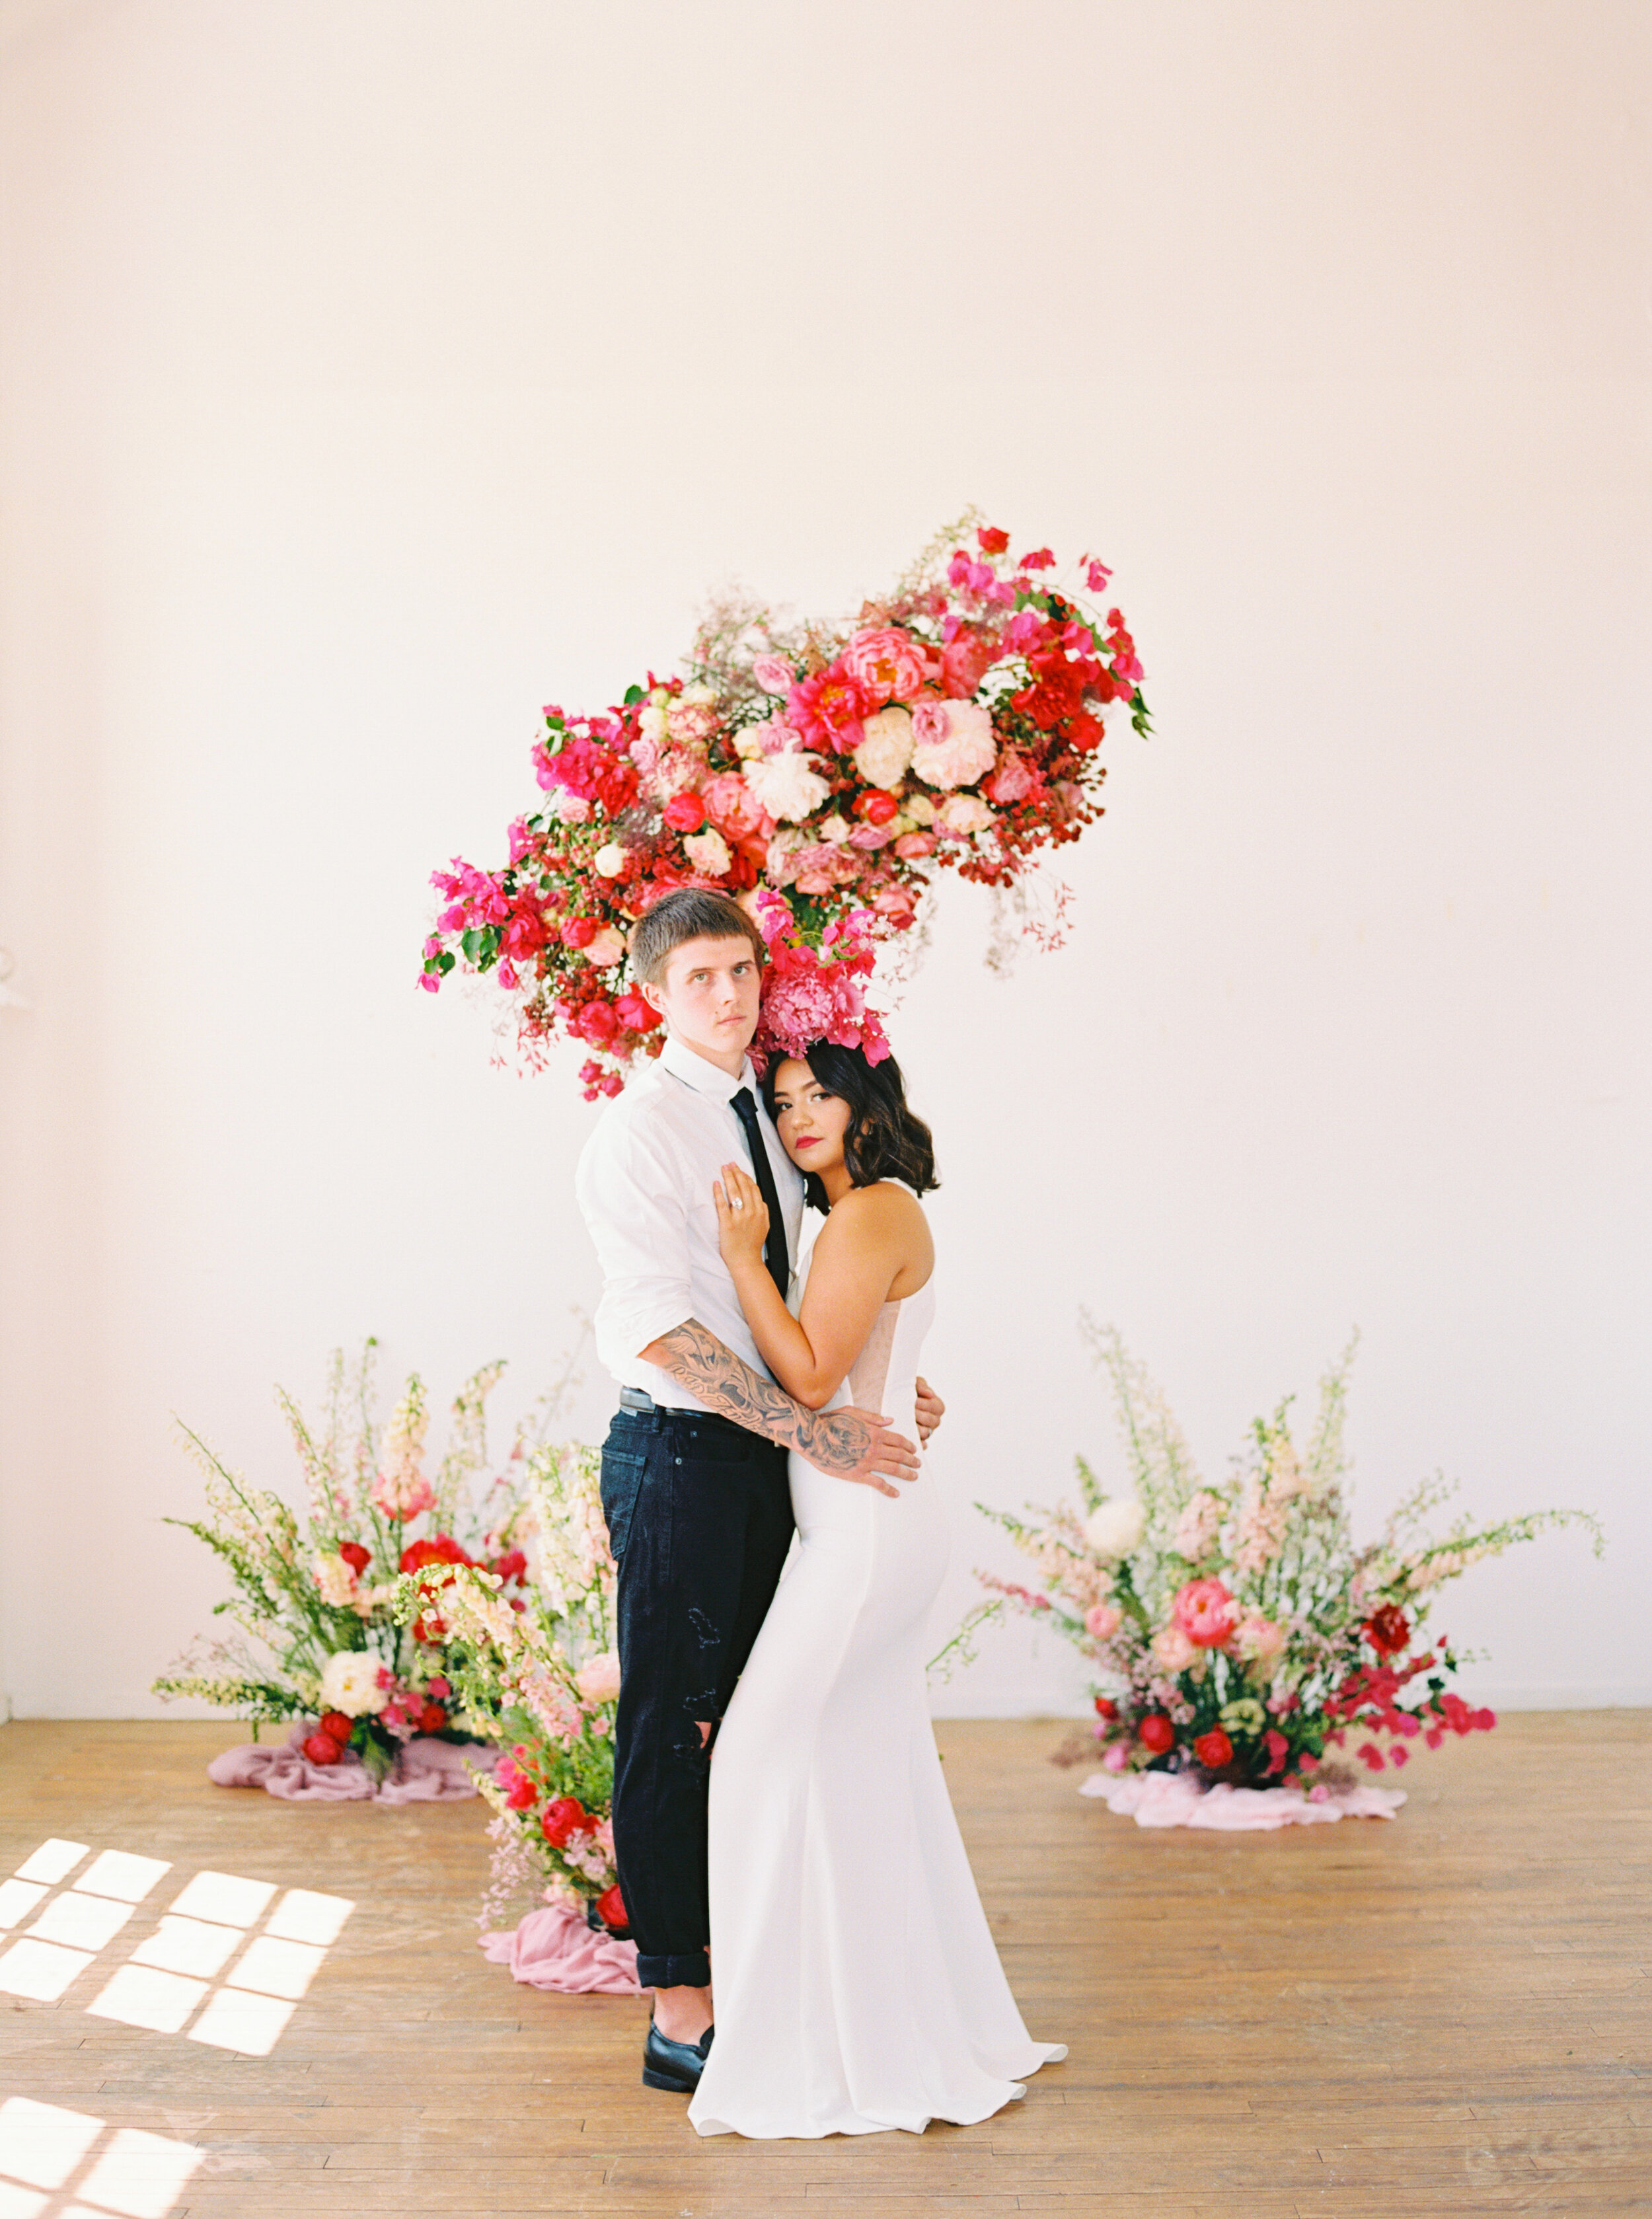 A Romantic Wedding Elopement Filled with Colorful Fuchsia - Sarahi Hadden Submission-108.jpg